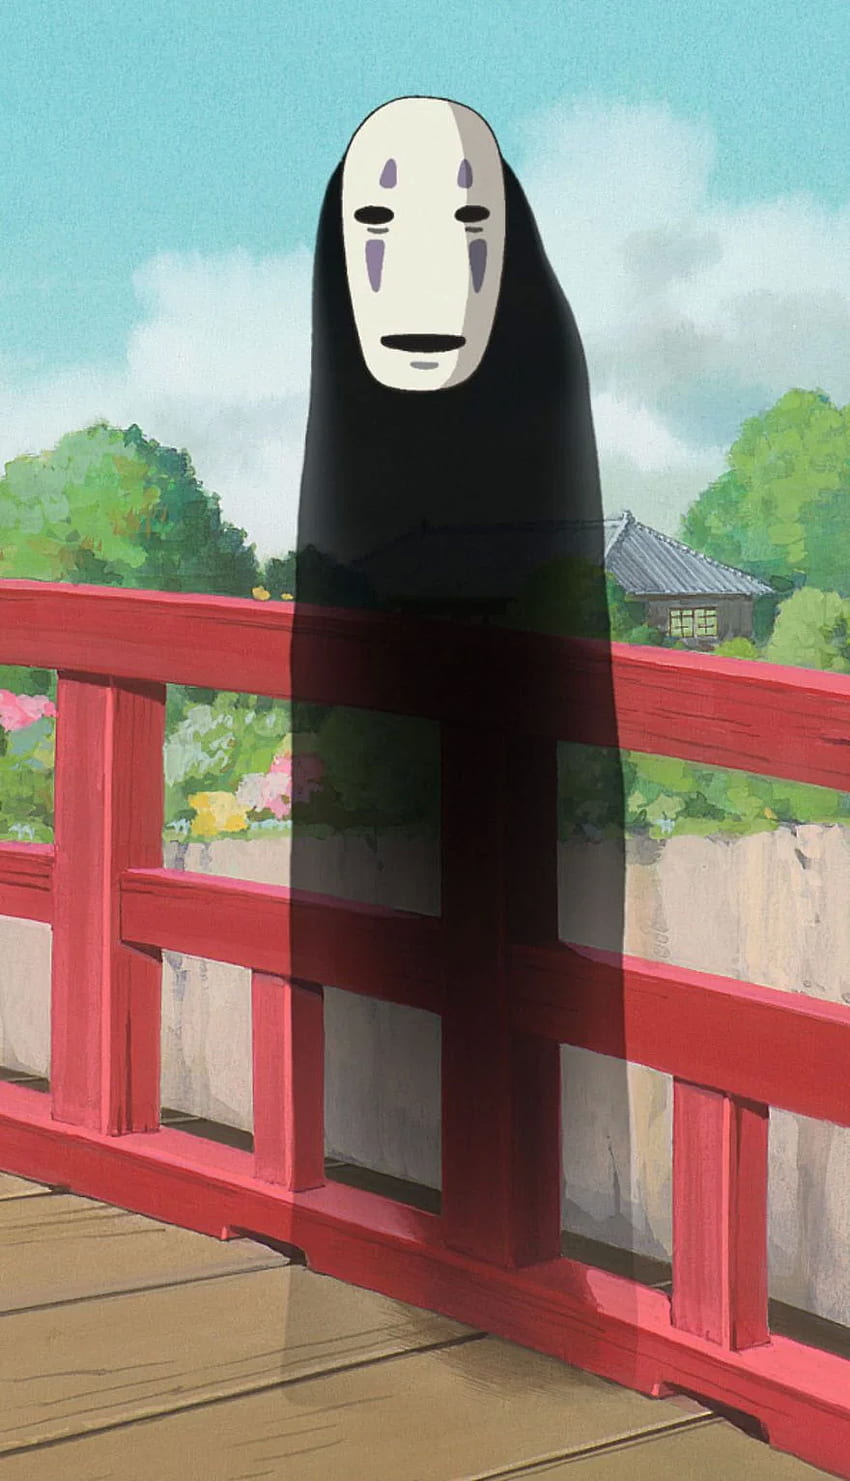 Celebrate The 31st Birtay Of Studio Ghibli With These 73 For Smartphones, Real Life Anime HD phone wallpaper